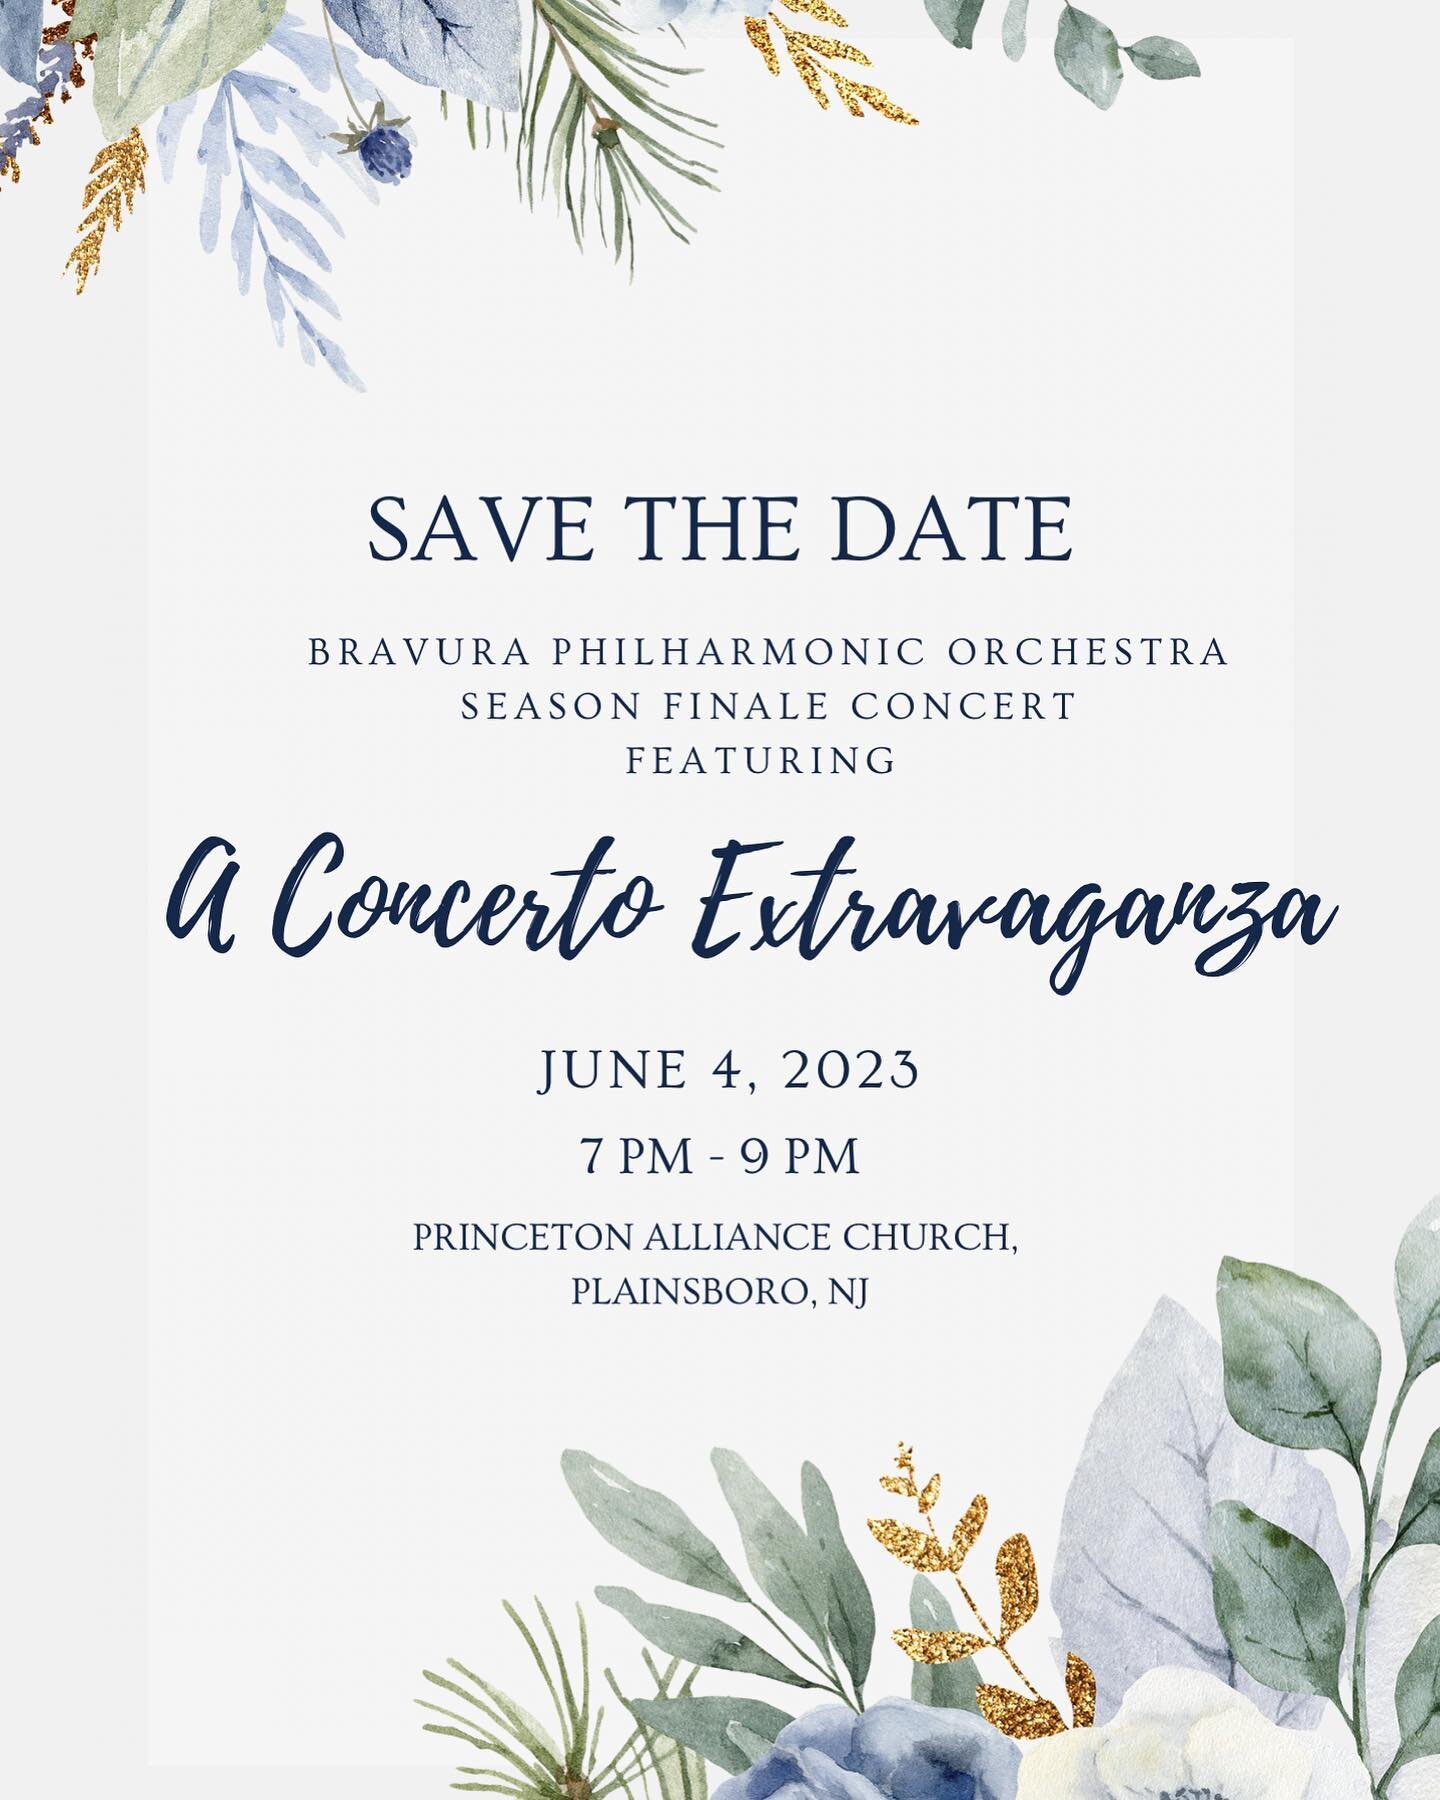 Good morning, Friend&rsquo;s of Bravura! Mark your calendar for June 4, 2023 for our season finale concert featuring our 2023 concerto competition winners!

There are 42 contestants from around the country participating in the 2023 Young Artists Comp